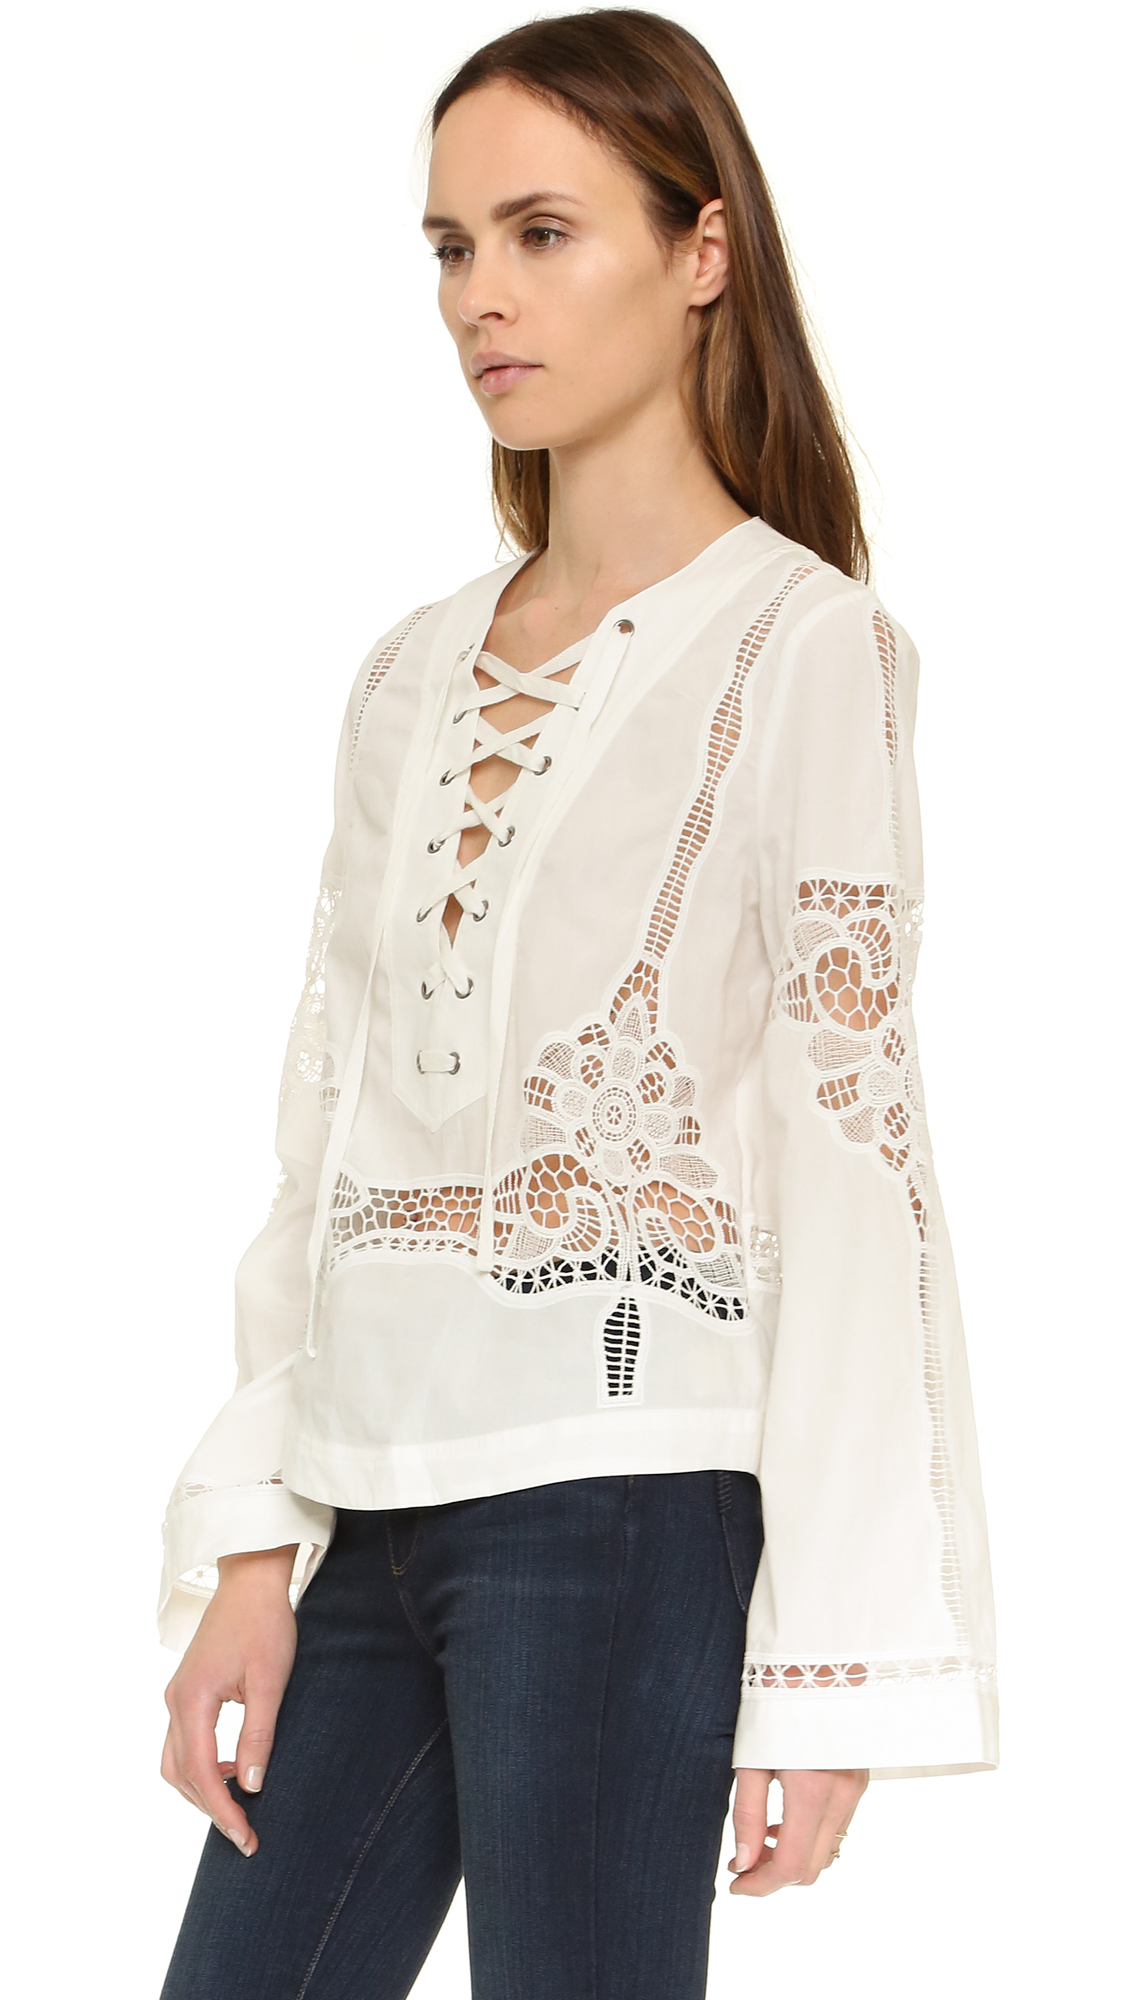 Lyst - Free People Bittersweet Button Down Top in White